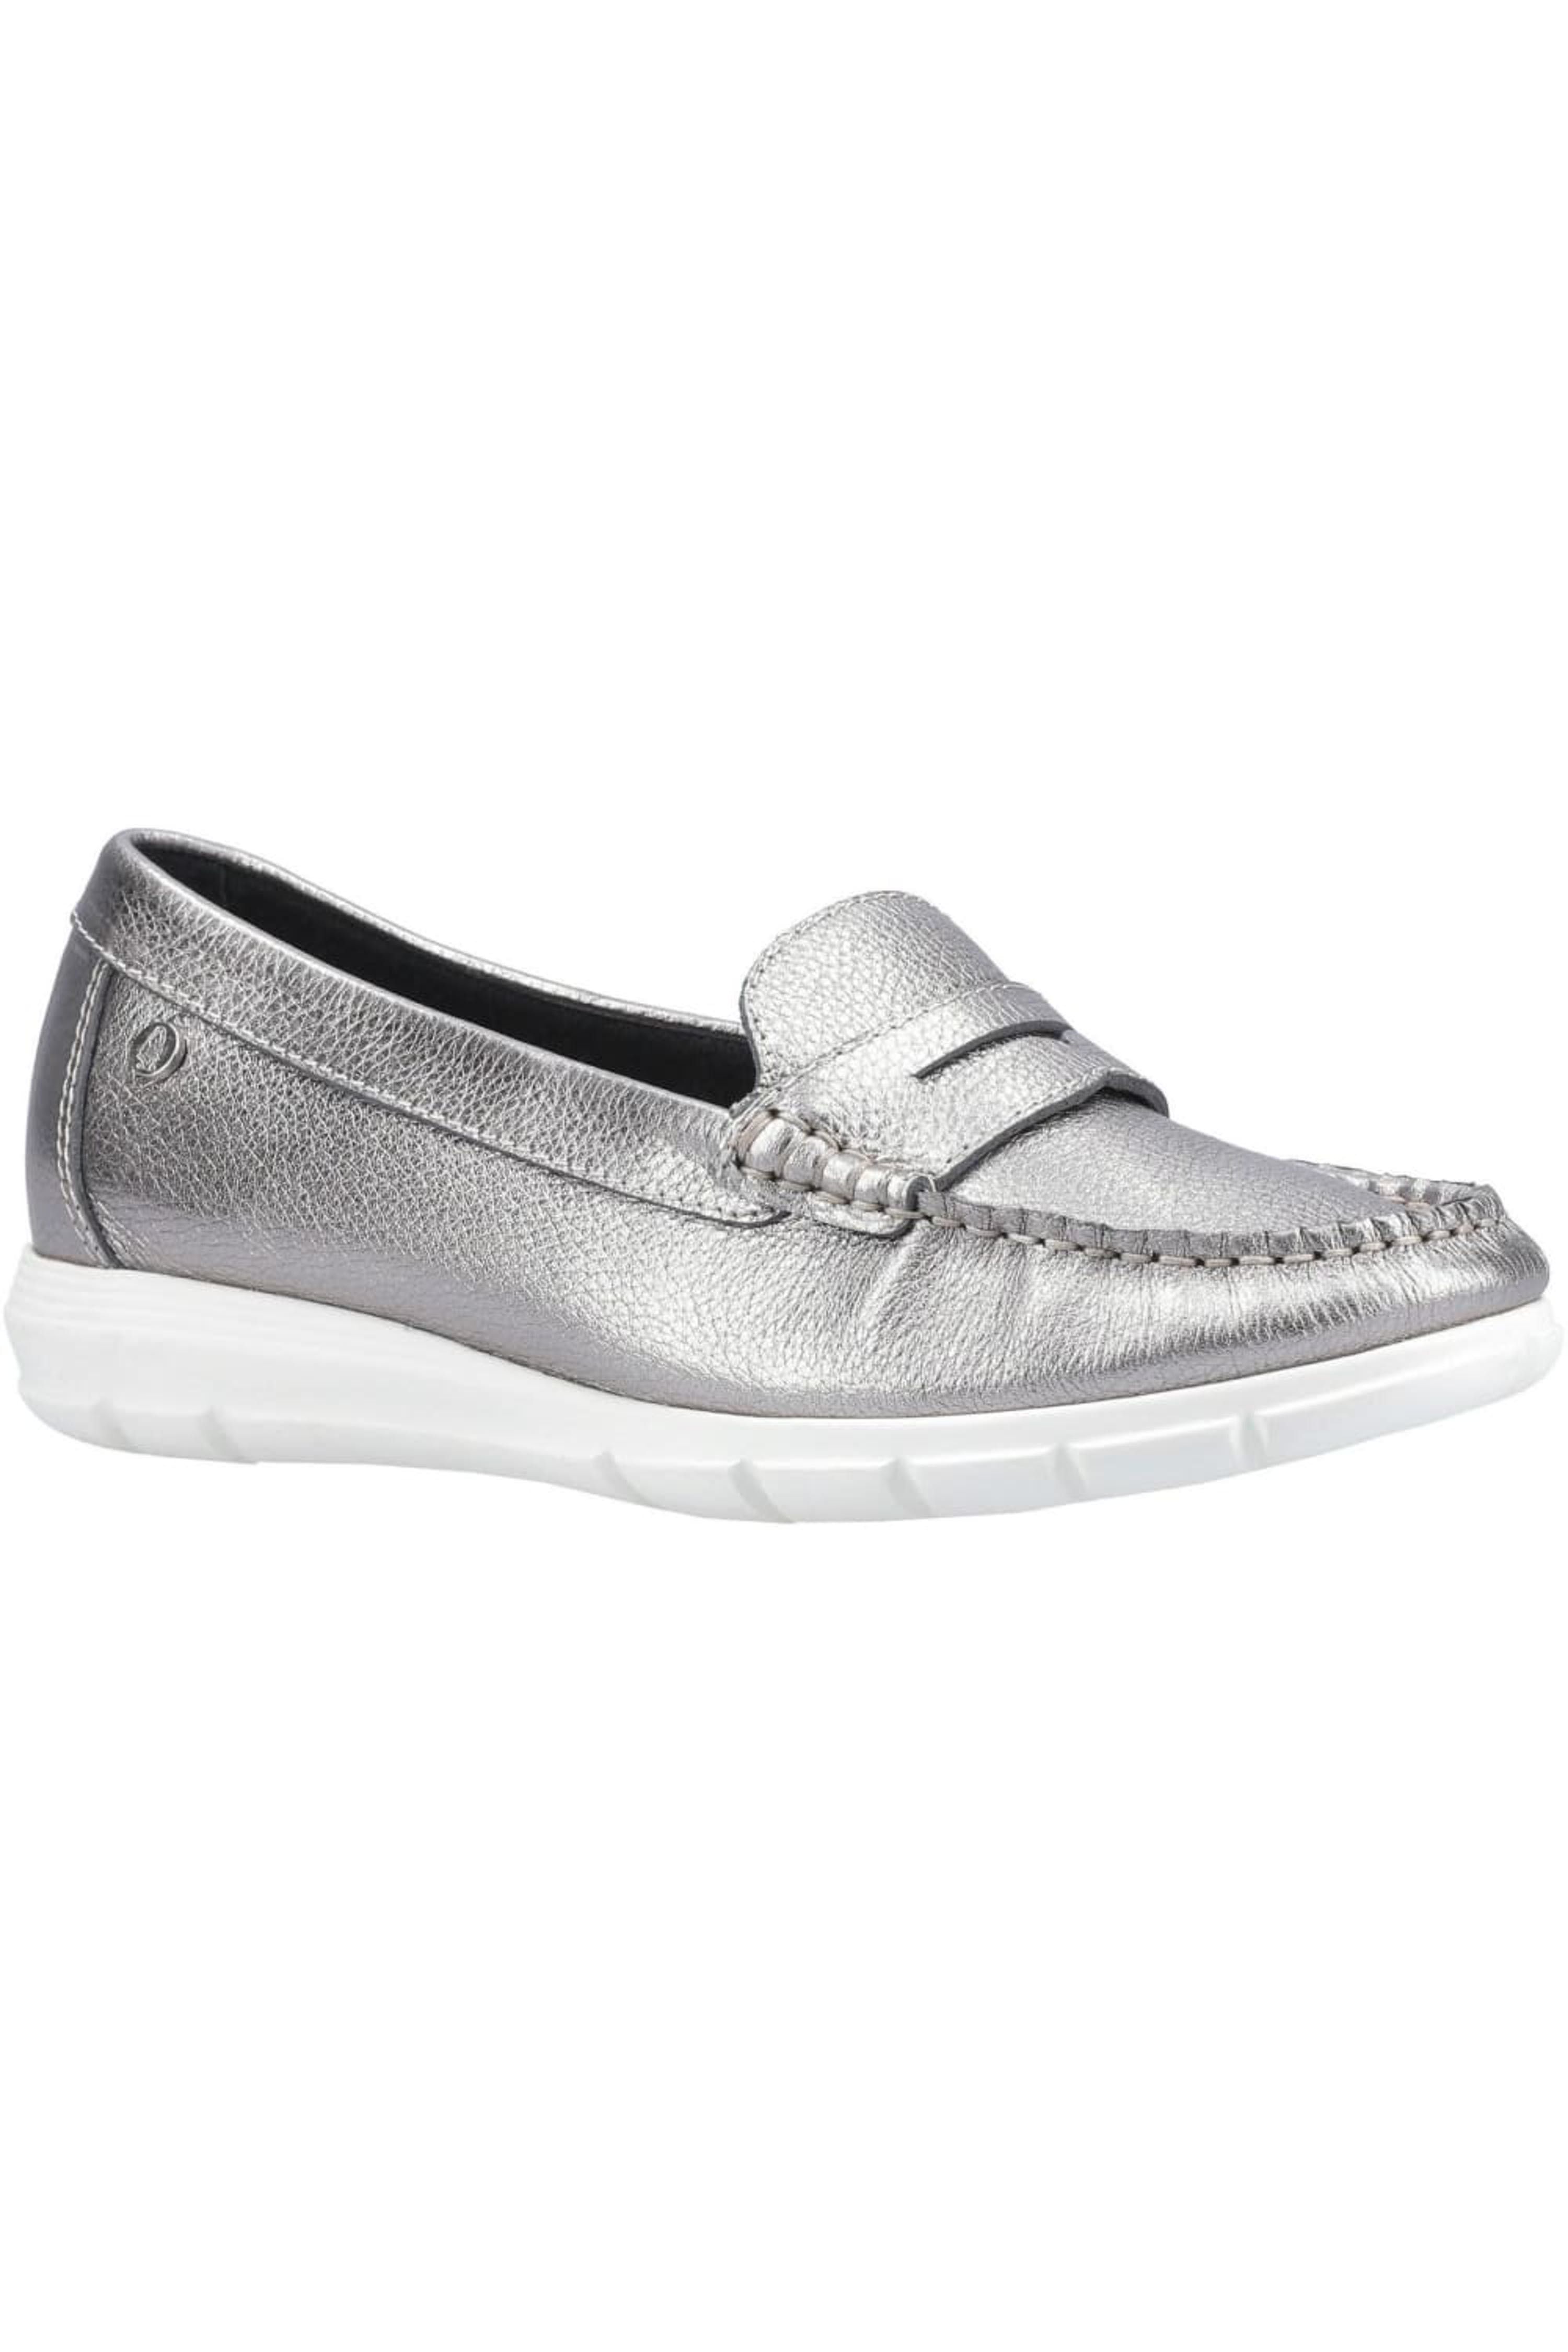 Hush Puppies Womens/Ladies Paige Leather Loafer (Silver) - 9 - Also in: 5, 6, 8, 7 | Verishop